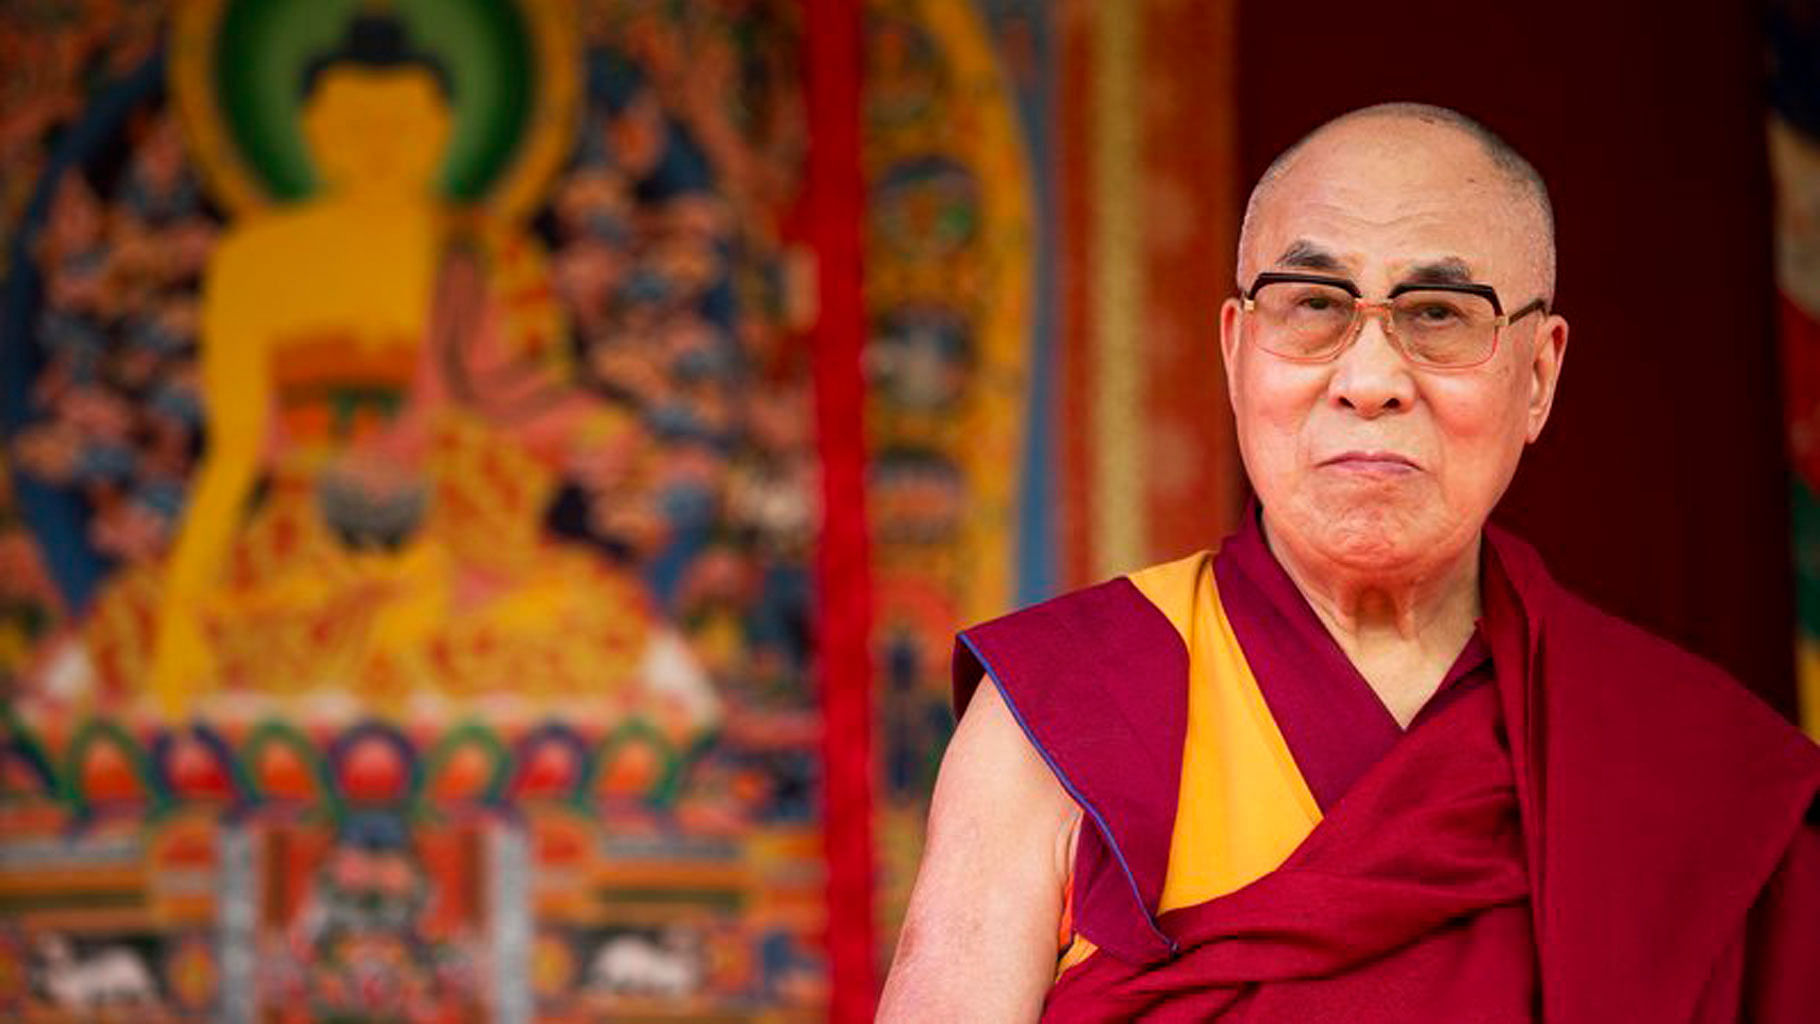 The Dalai Lama had stirred controversy by saying that if a woman succeeds him, she should be attractive.